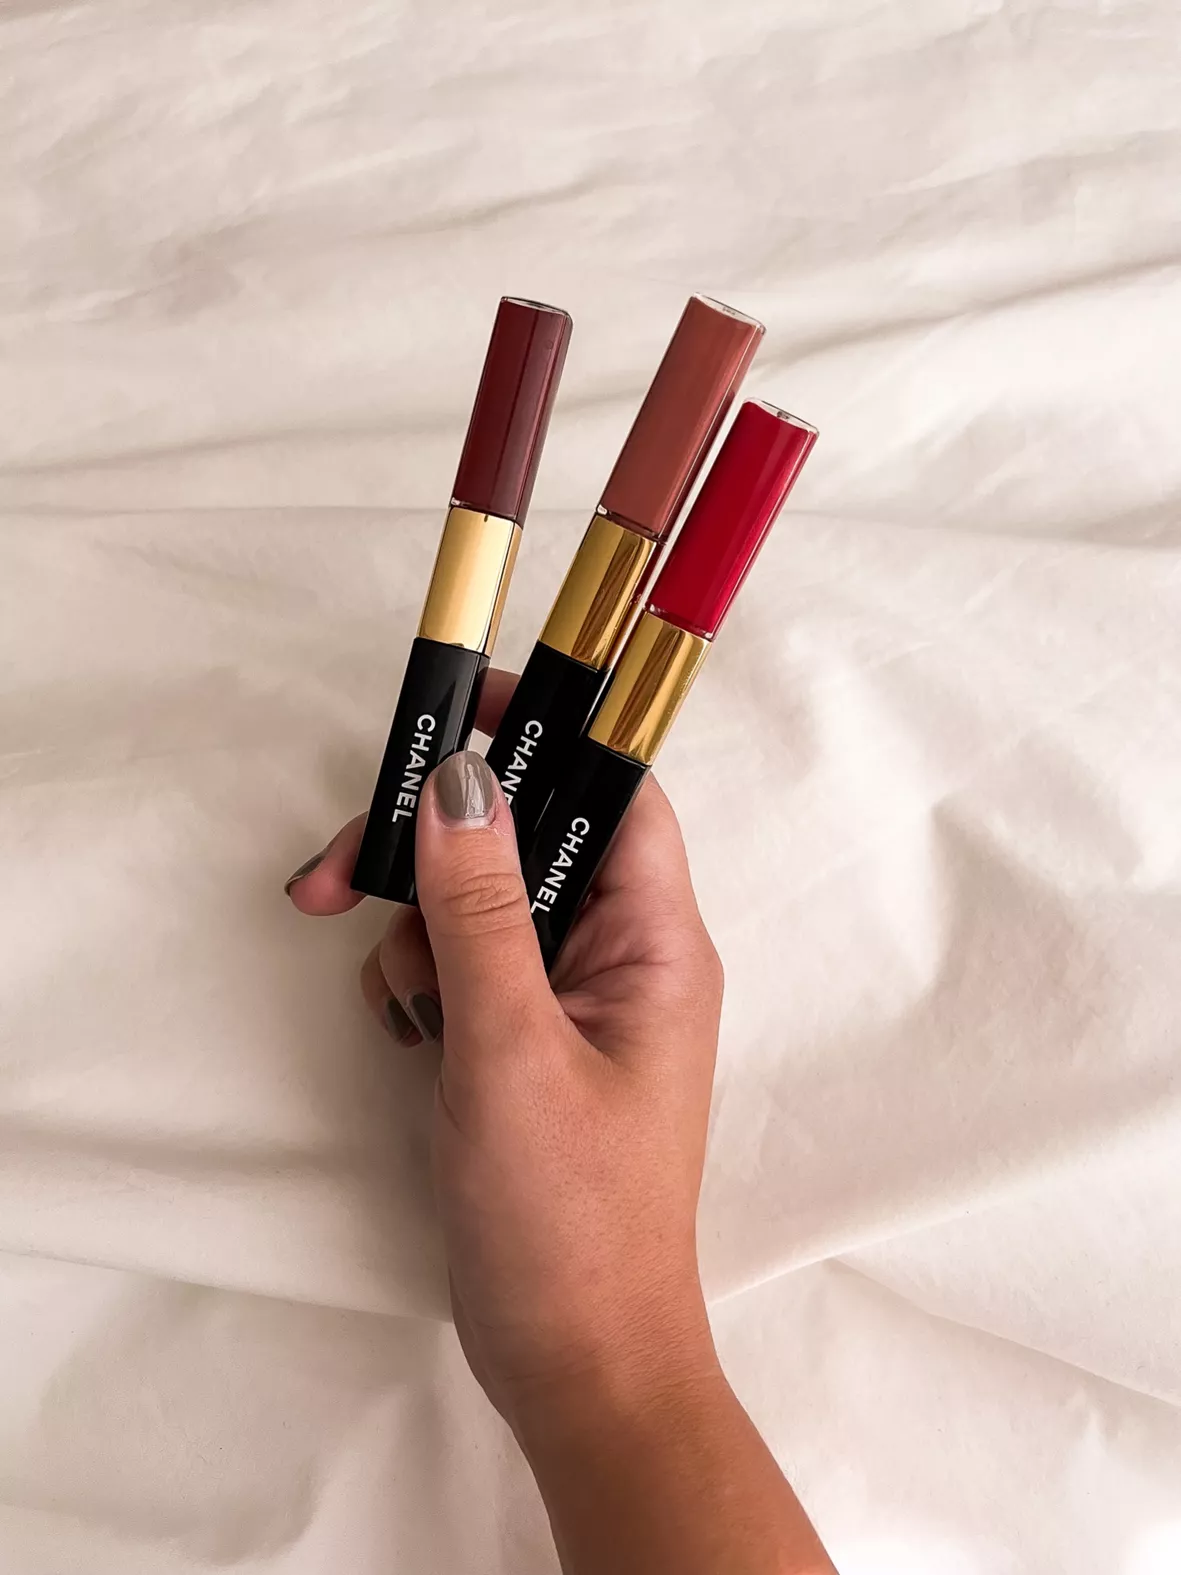 NEW CHANEL 'LE ROUGE DUO ULTRA TENUE' LONG WEAR LIPSTICK SHADES